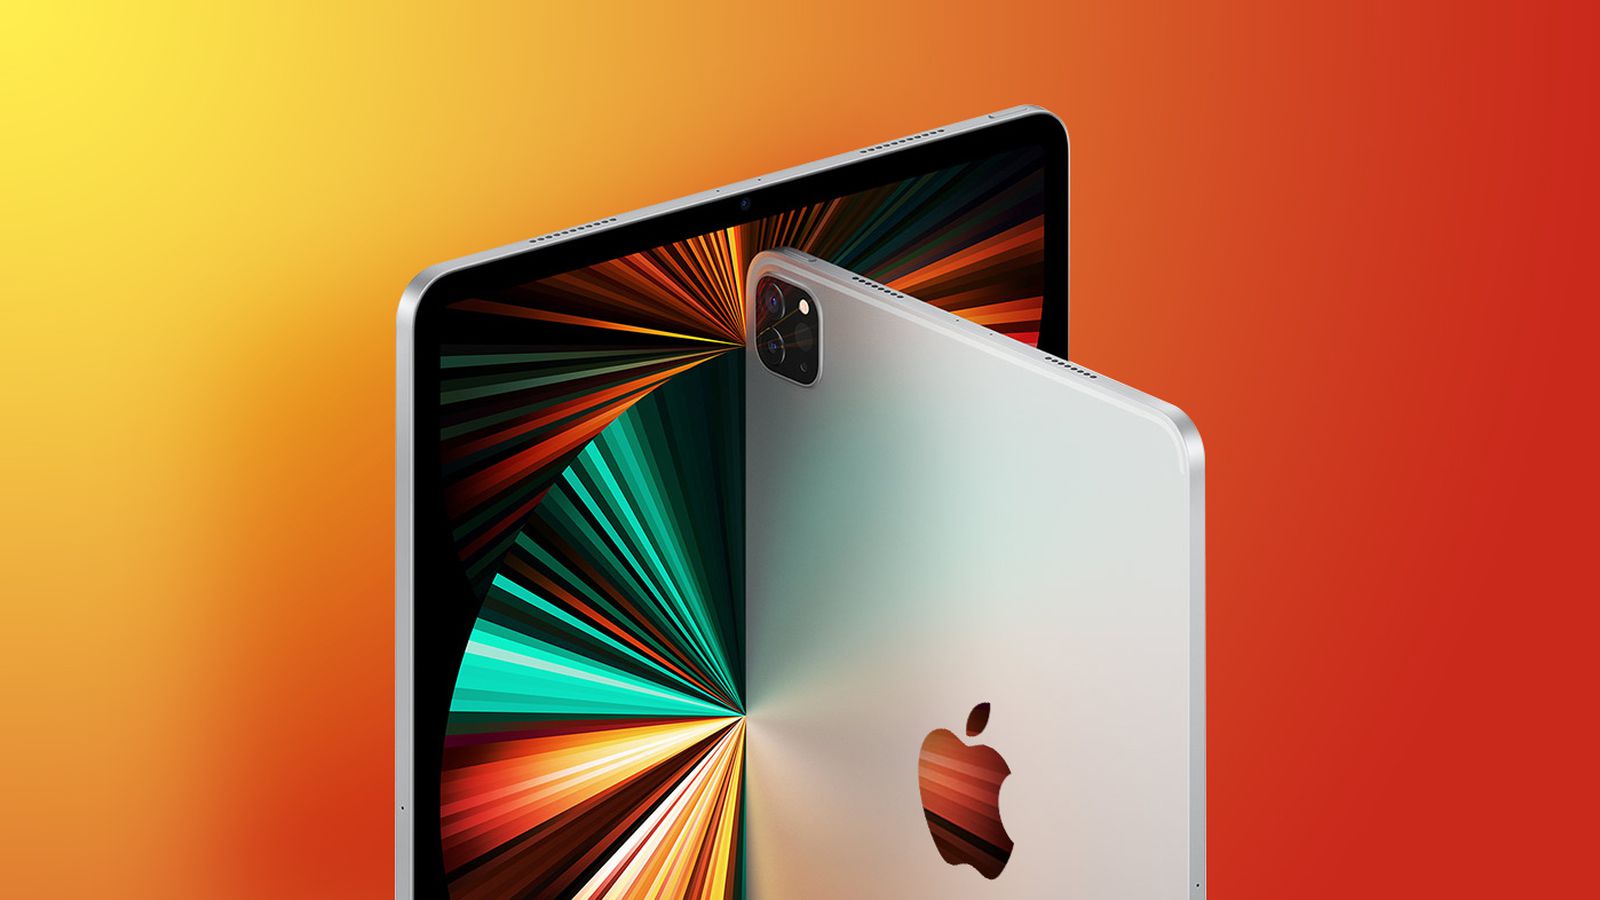 Gurman: New M2 iPad Pro Models to Be Announced ‘In a Matter of Days’ – MacRumors